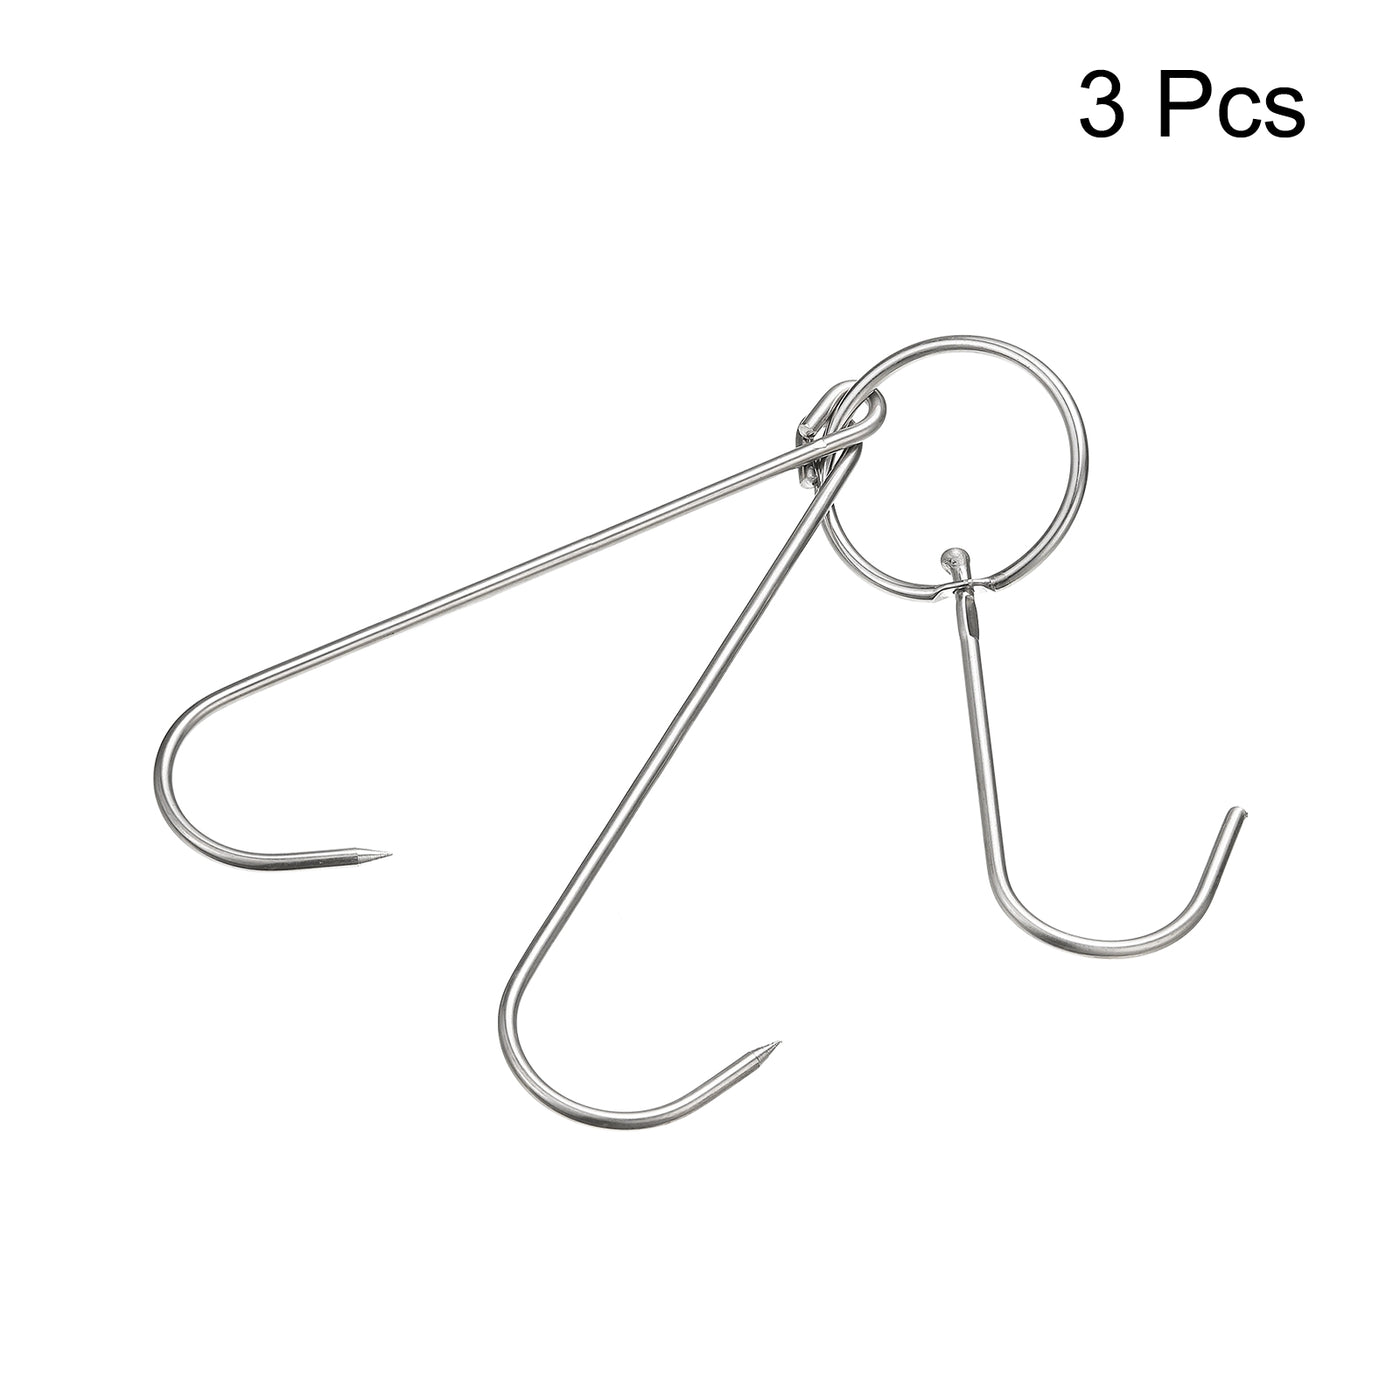 uxcell Uxcell Double Meat Hooks, Thickness Stainless Steel Smoker Hook Tools for Grill Cooking Fish Chicken